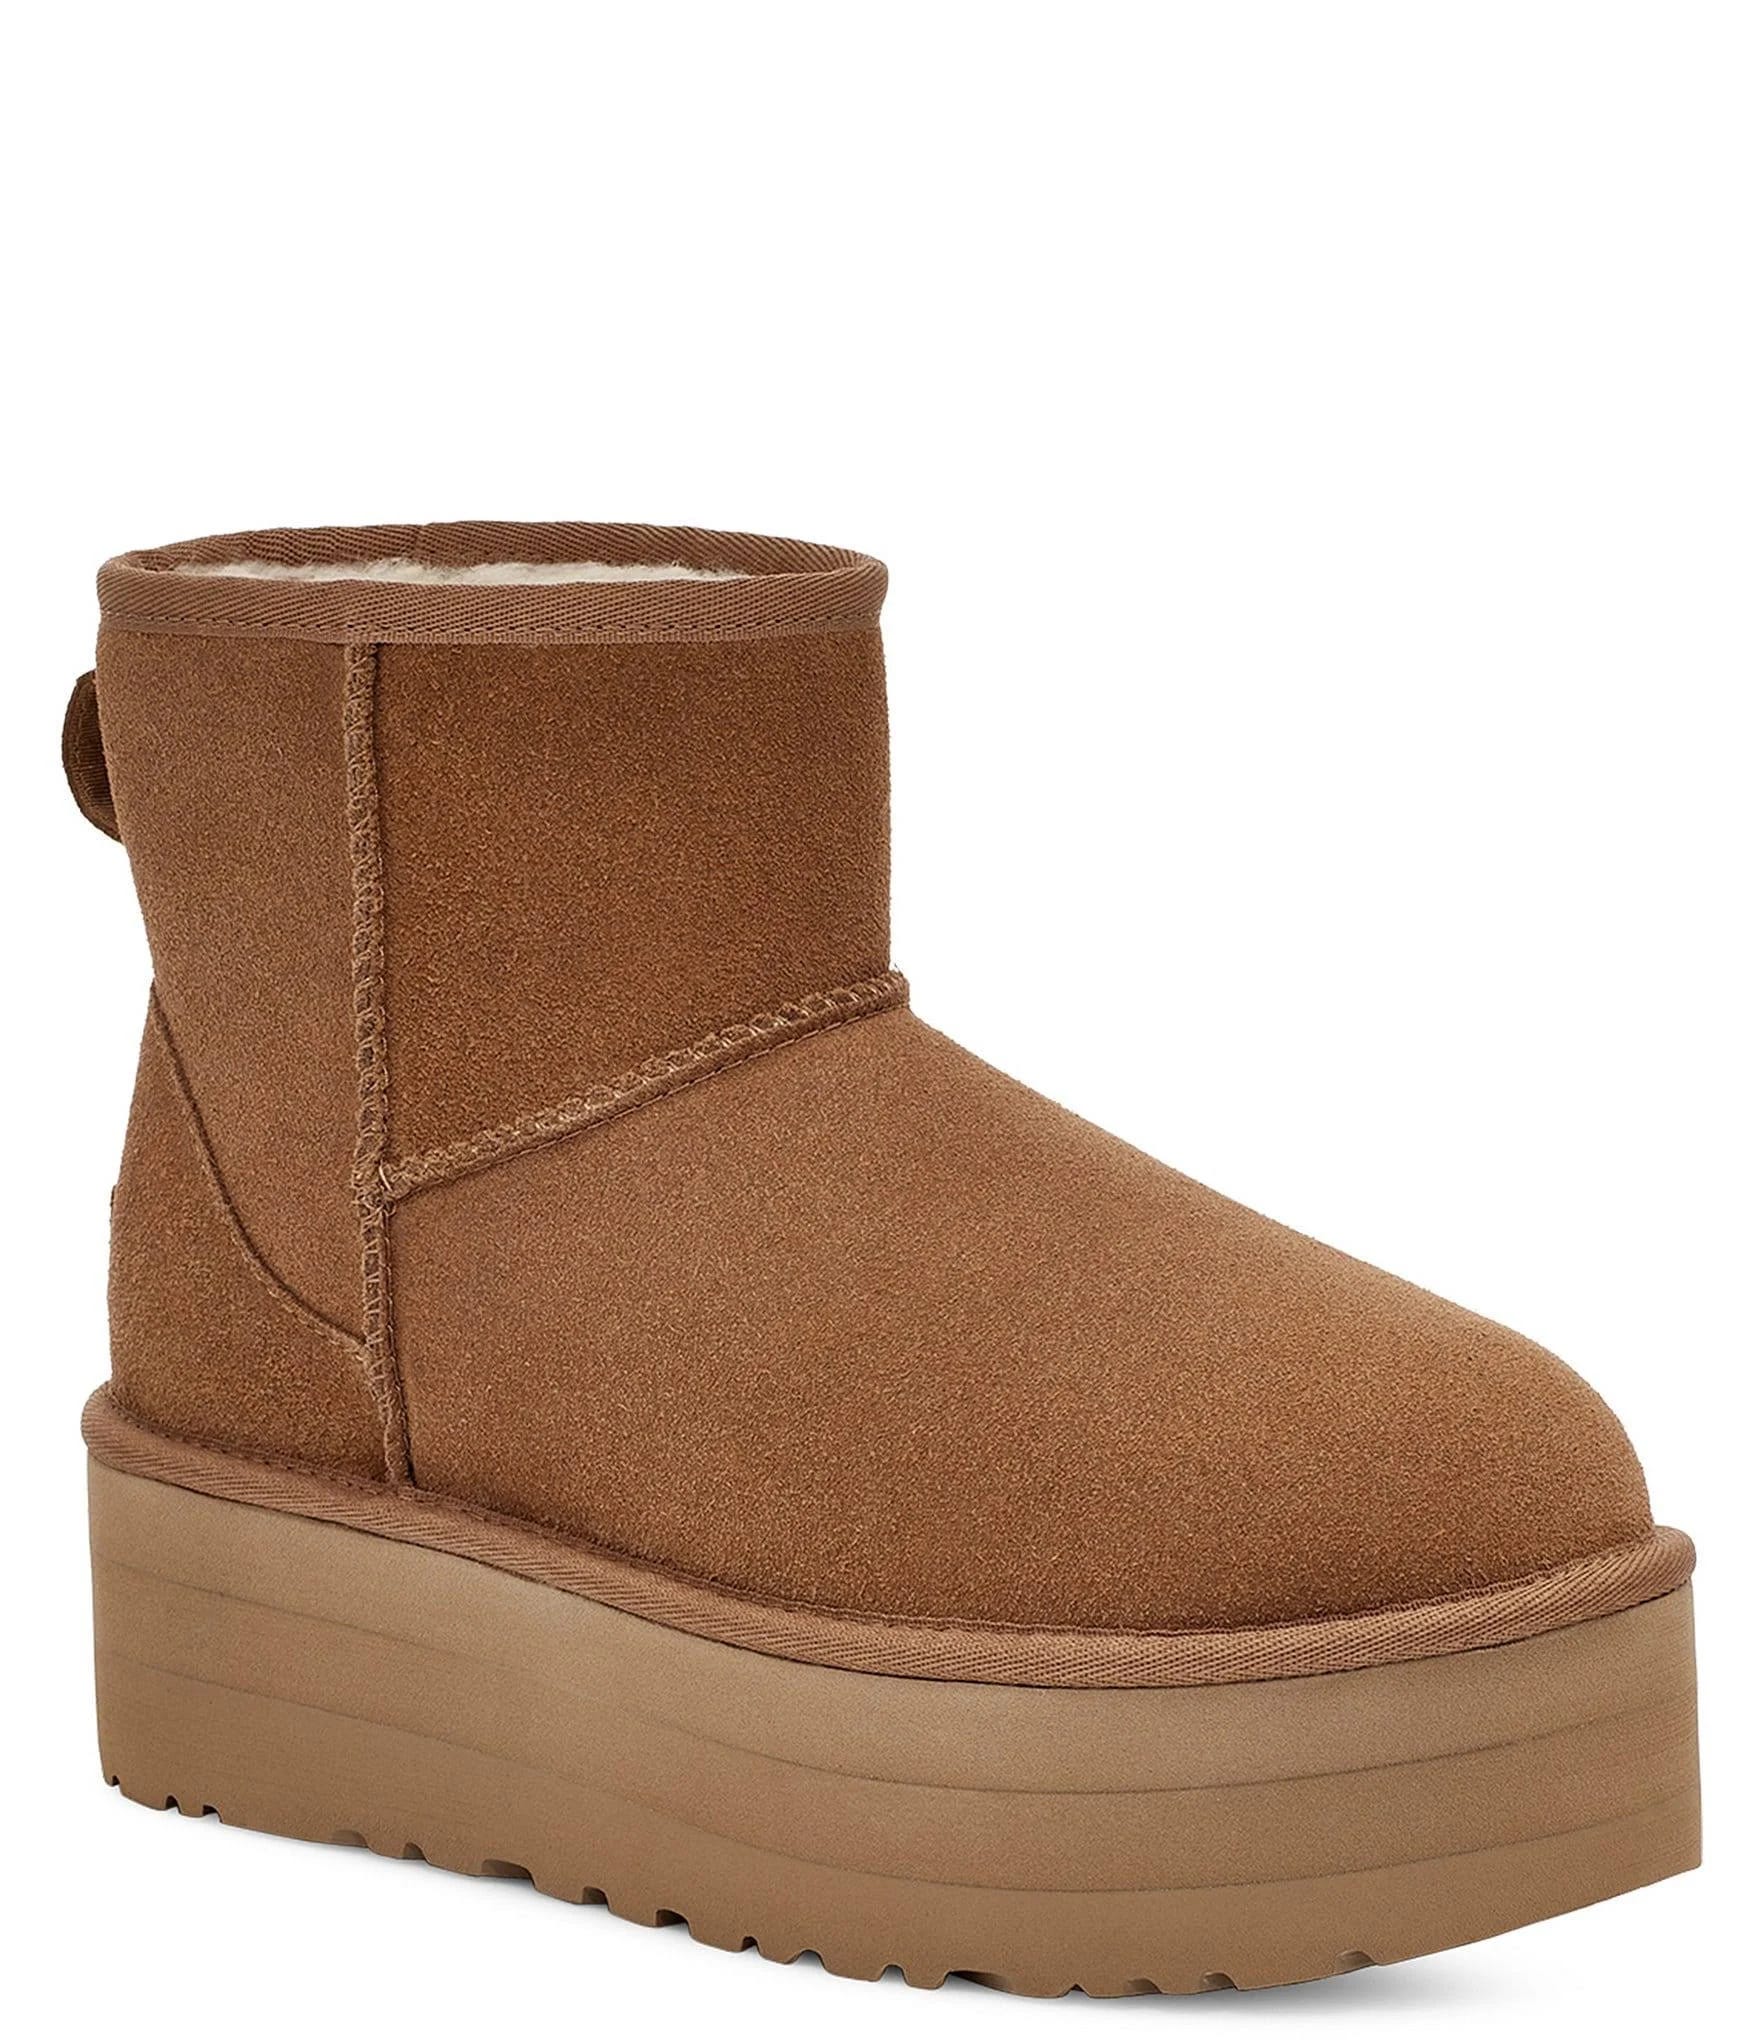 Ugg Women's Brown Platform Heeled Boots with Wool-Blend Lining | Image